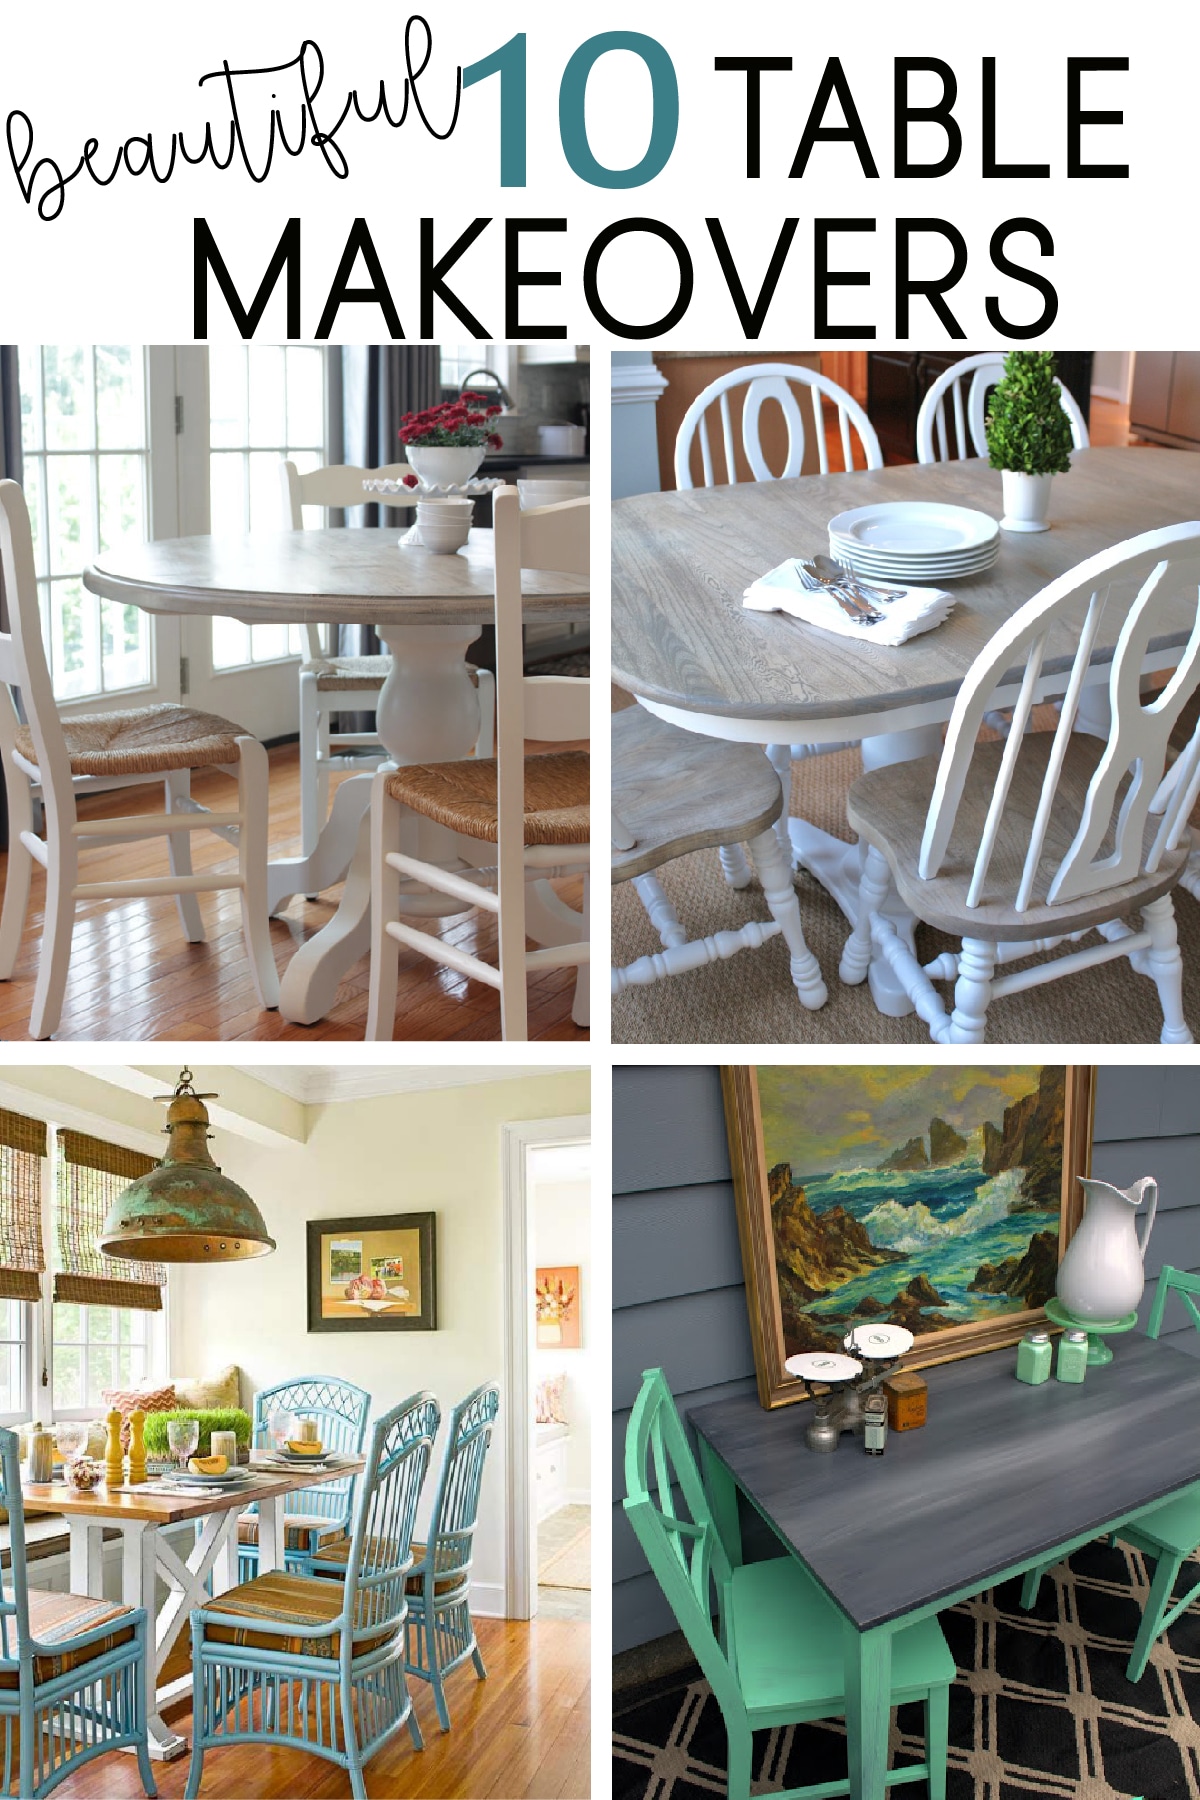 Kitchen Table Transformations, Dining Room Table Makeover Ideas